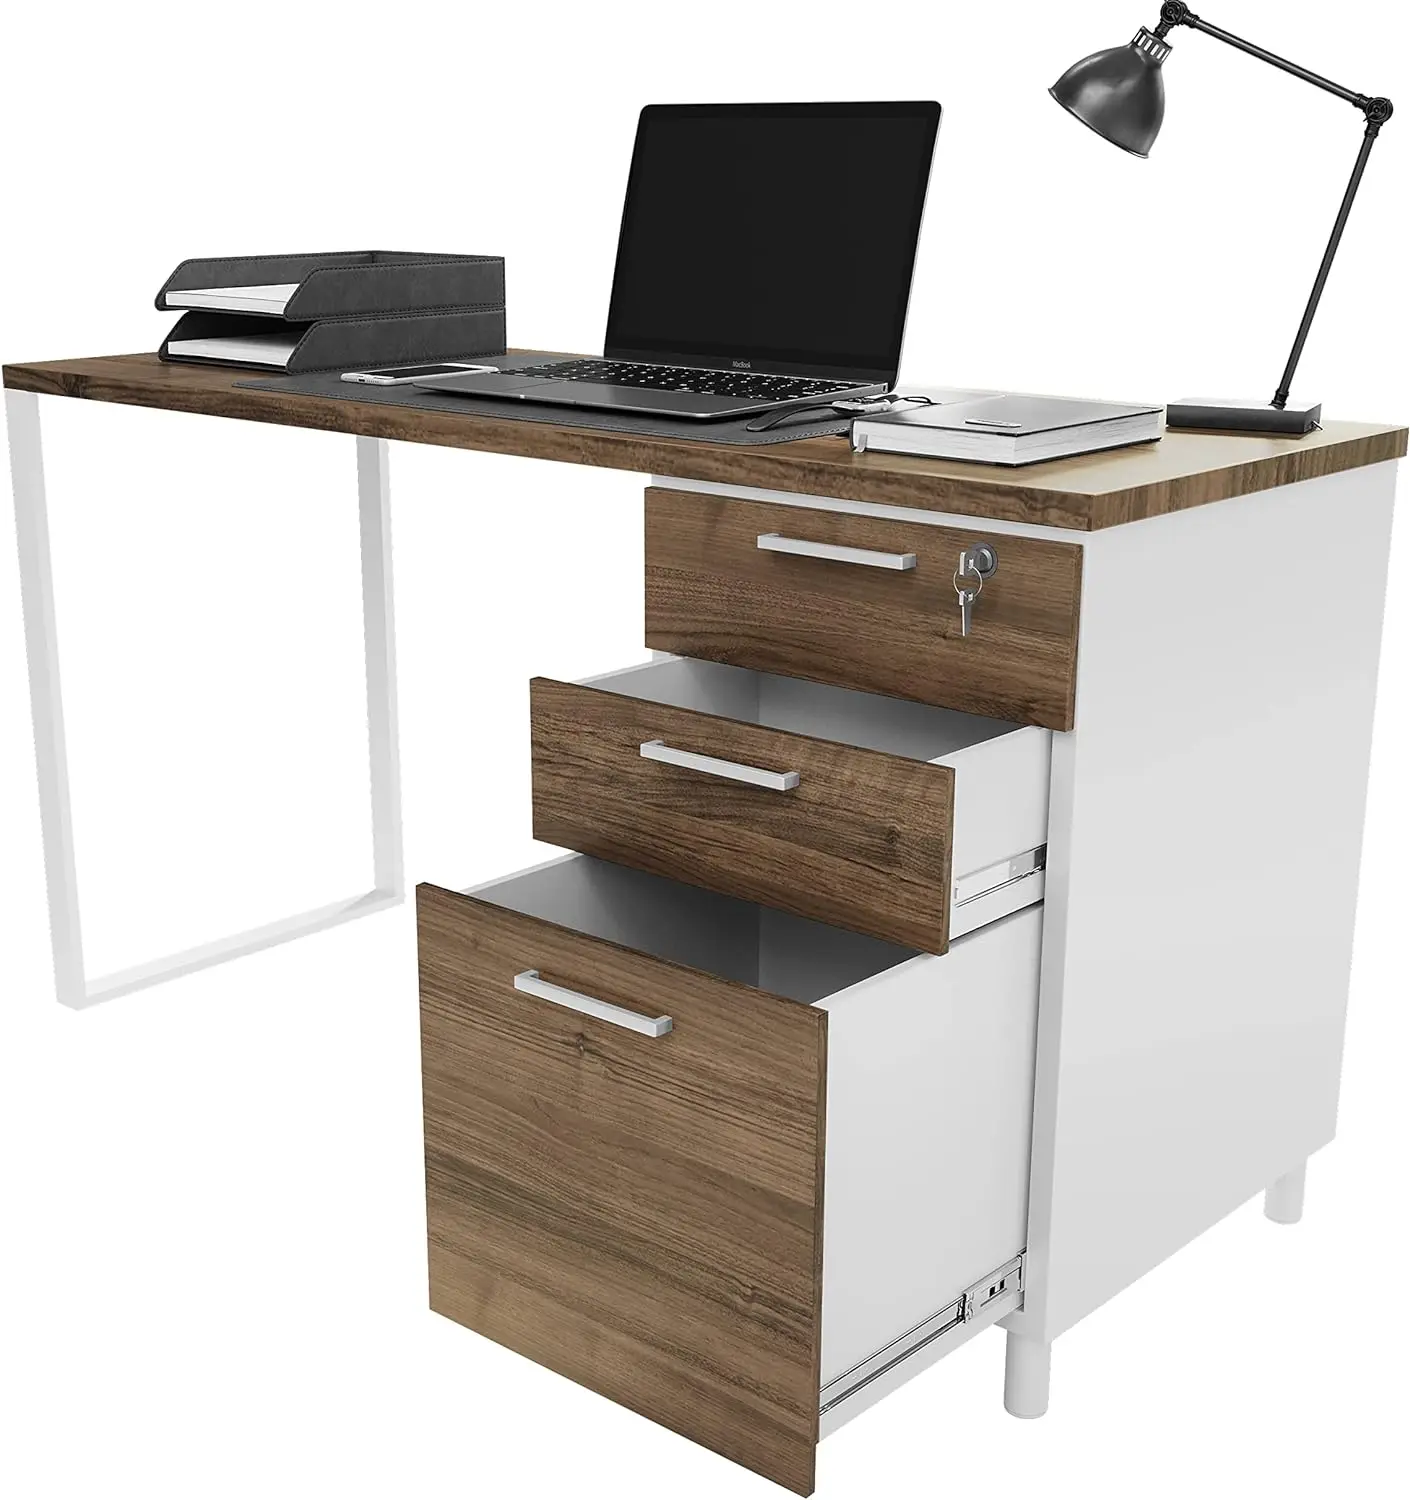 

Milano Home Office Desk - 47Inch Cass Walnut/White Home Office Desk with Drawers - Modern Computer Desk with Storage, Detachable